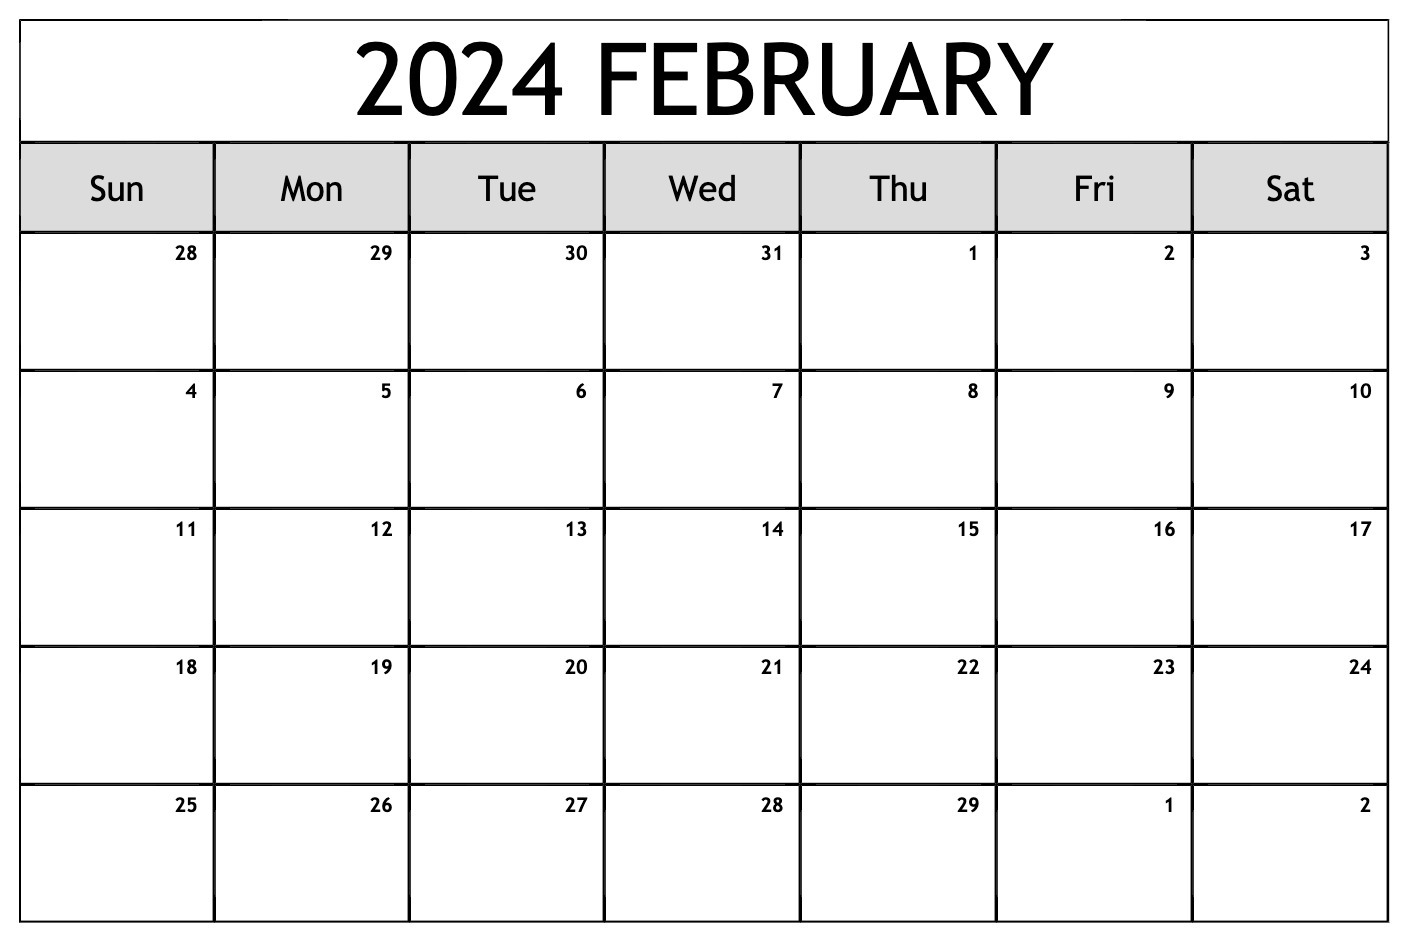 February 2024 calendar with space for notes